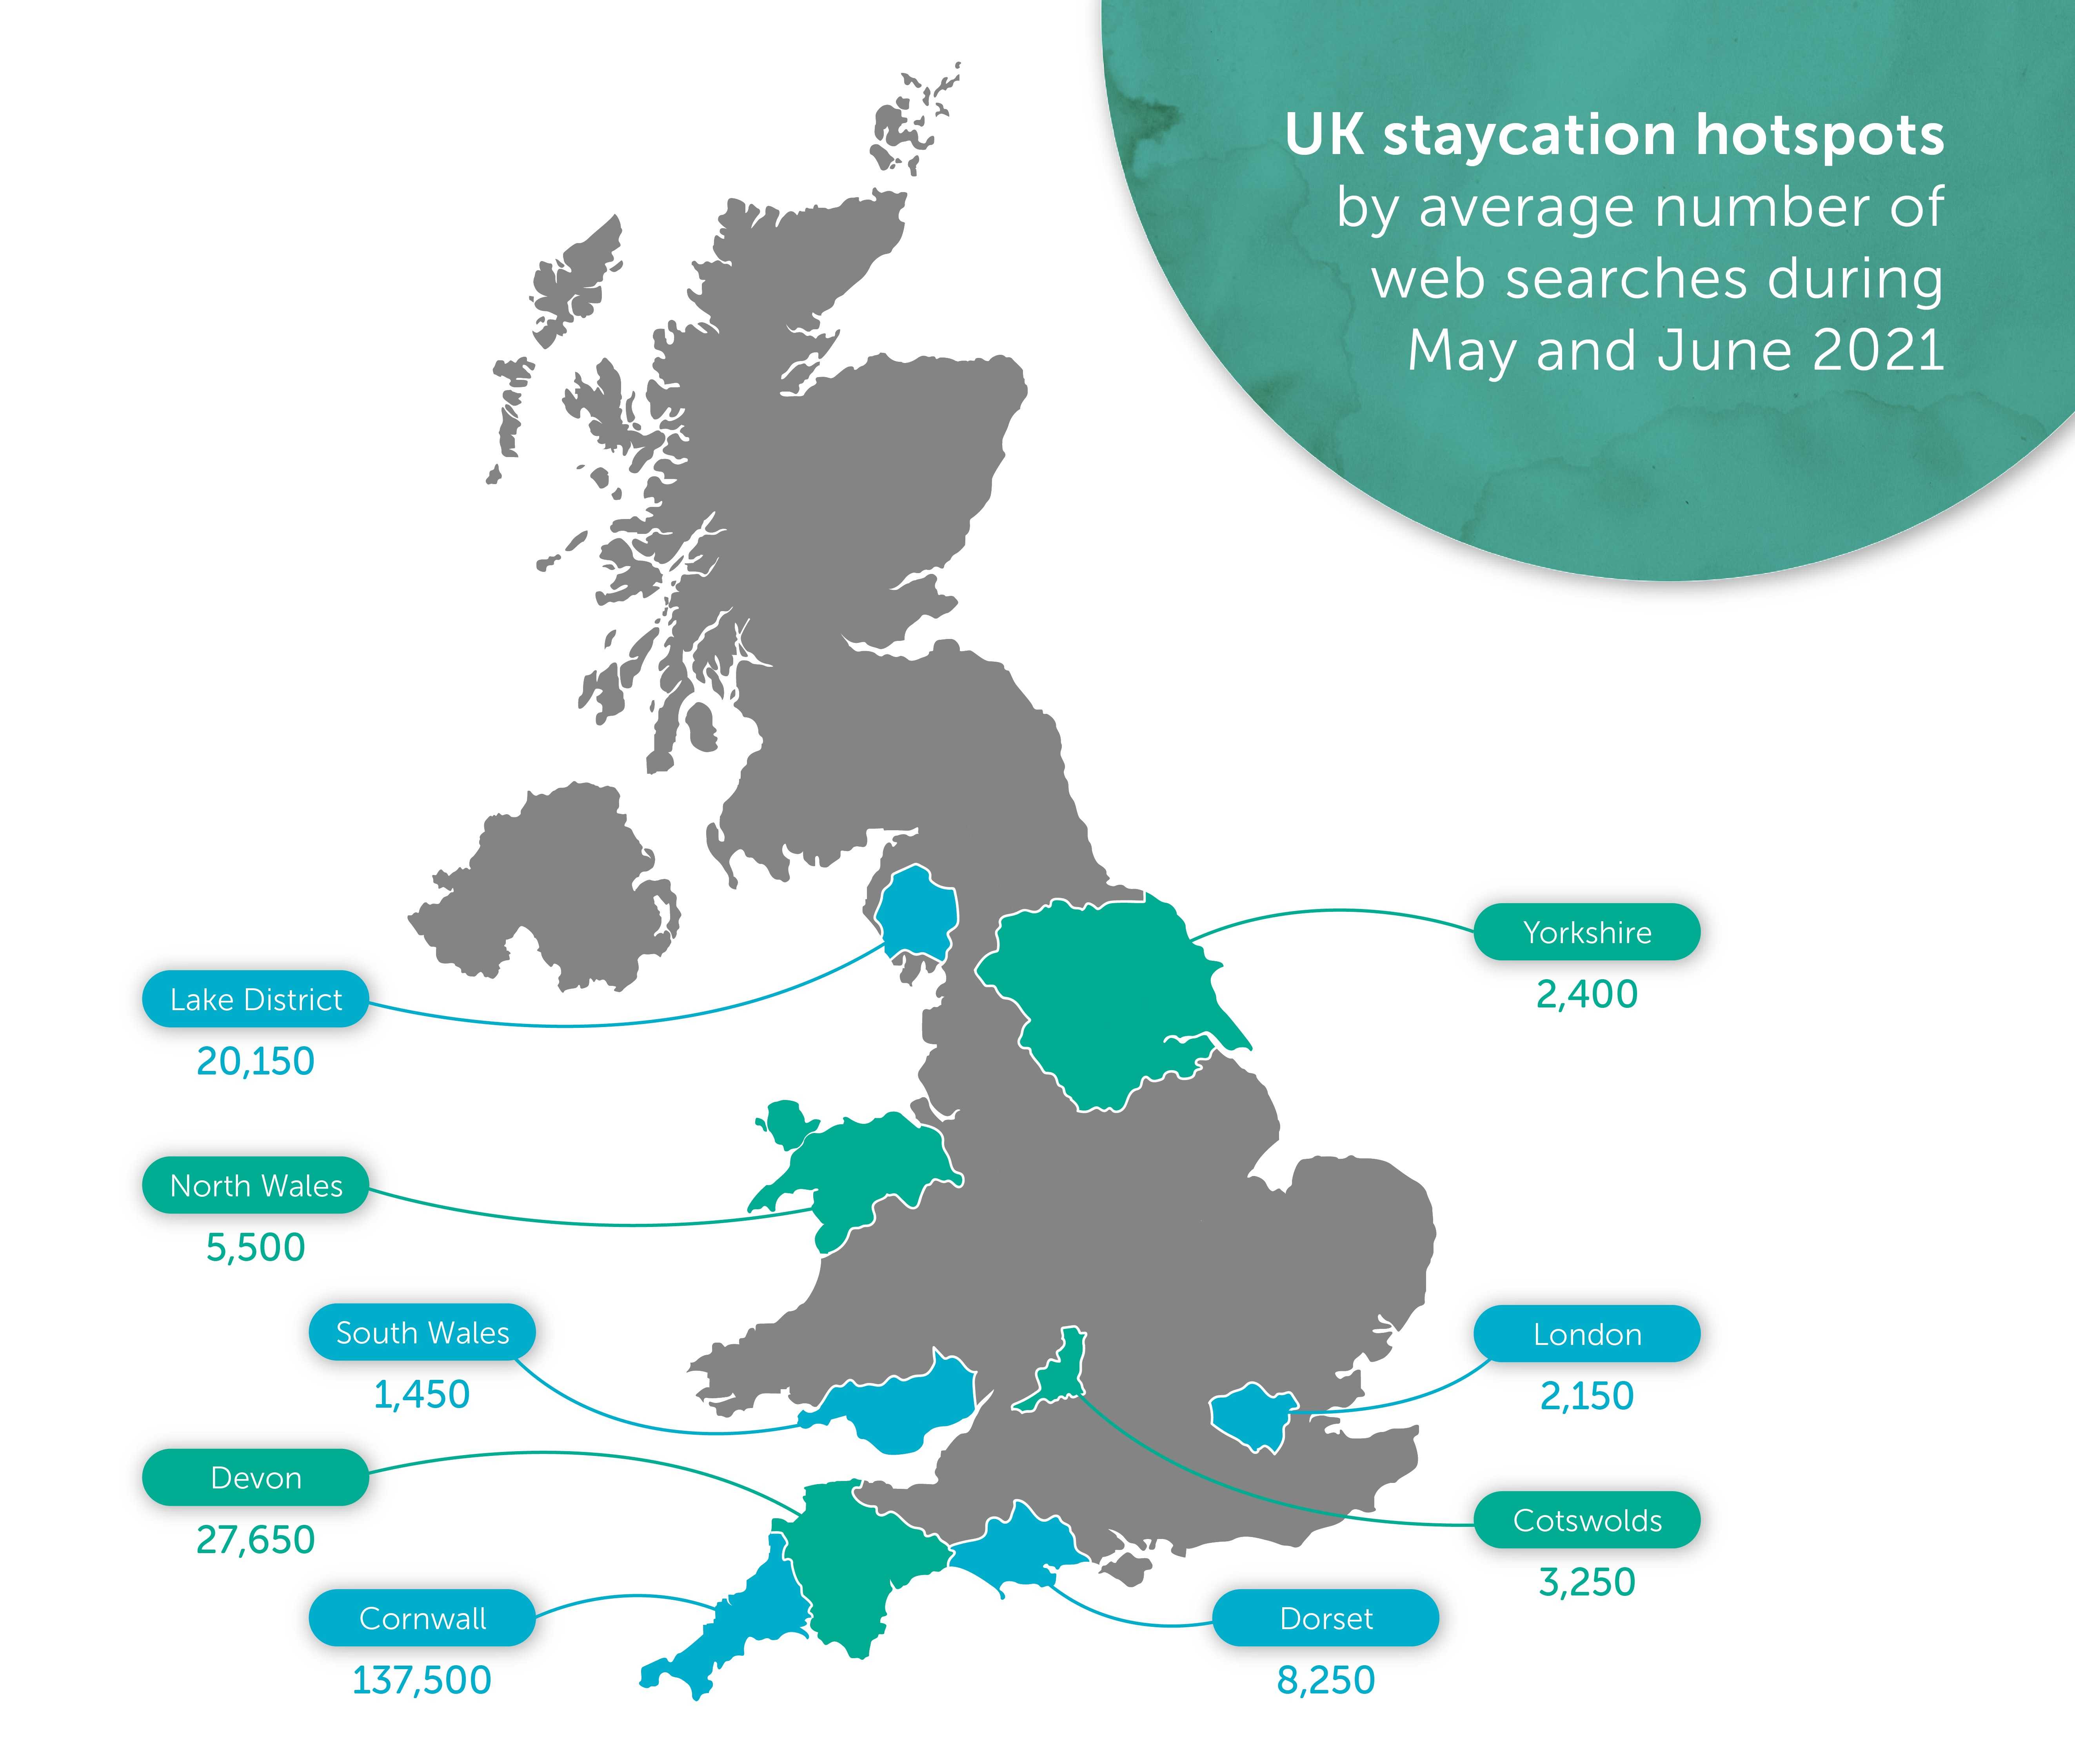 UK staycation hotspots by average number of searches during May and June 2021